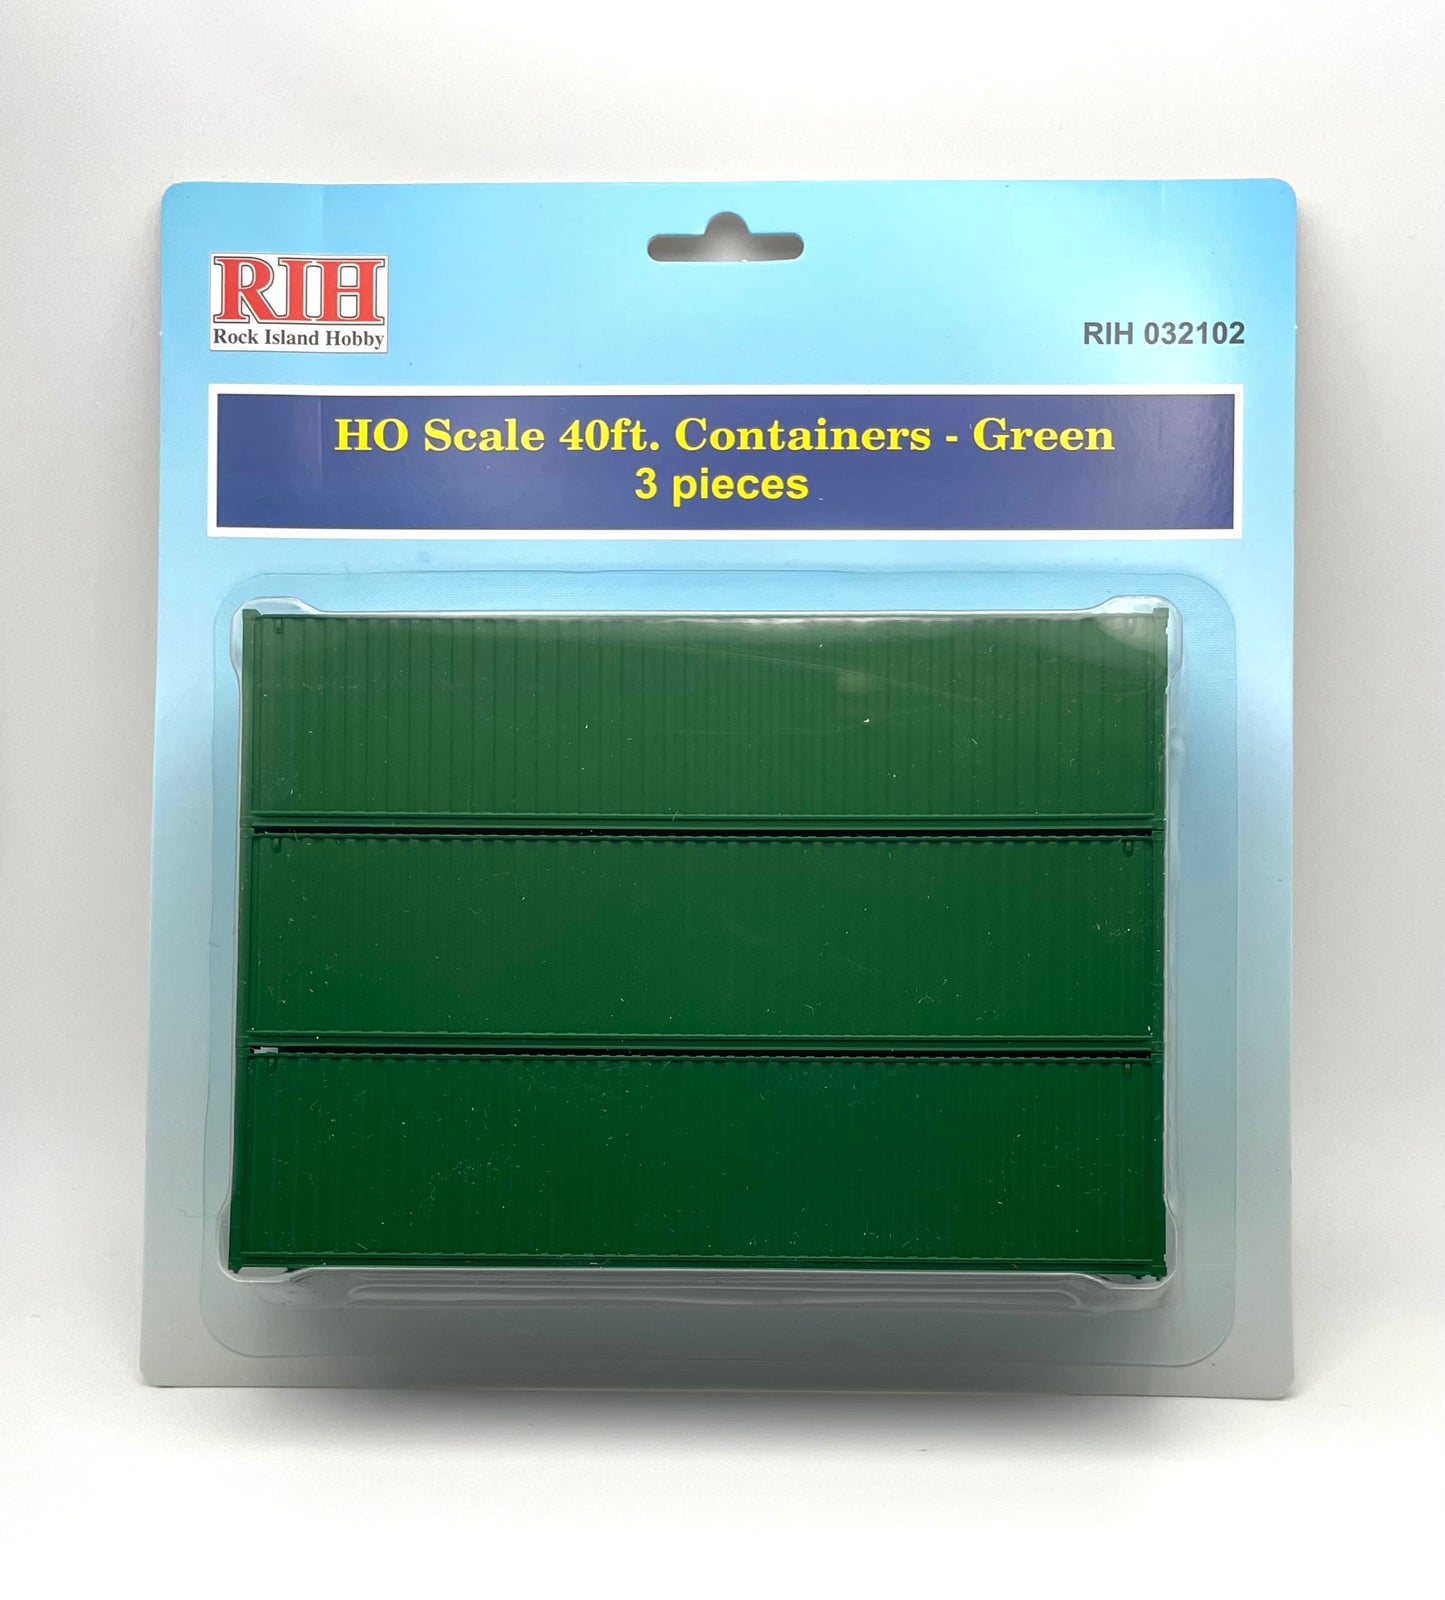 HO Scale 40ft Containers - Green